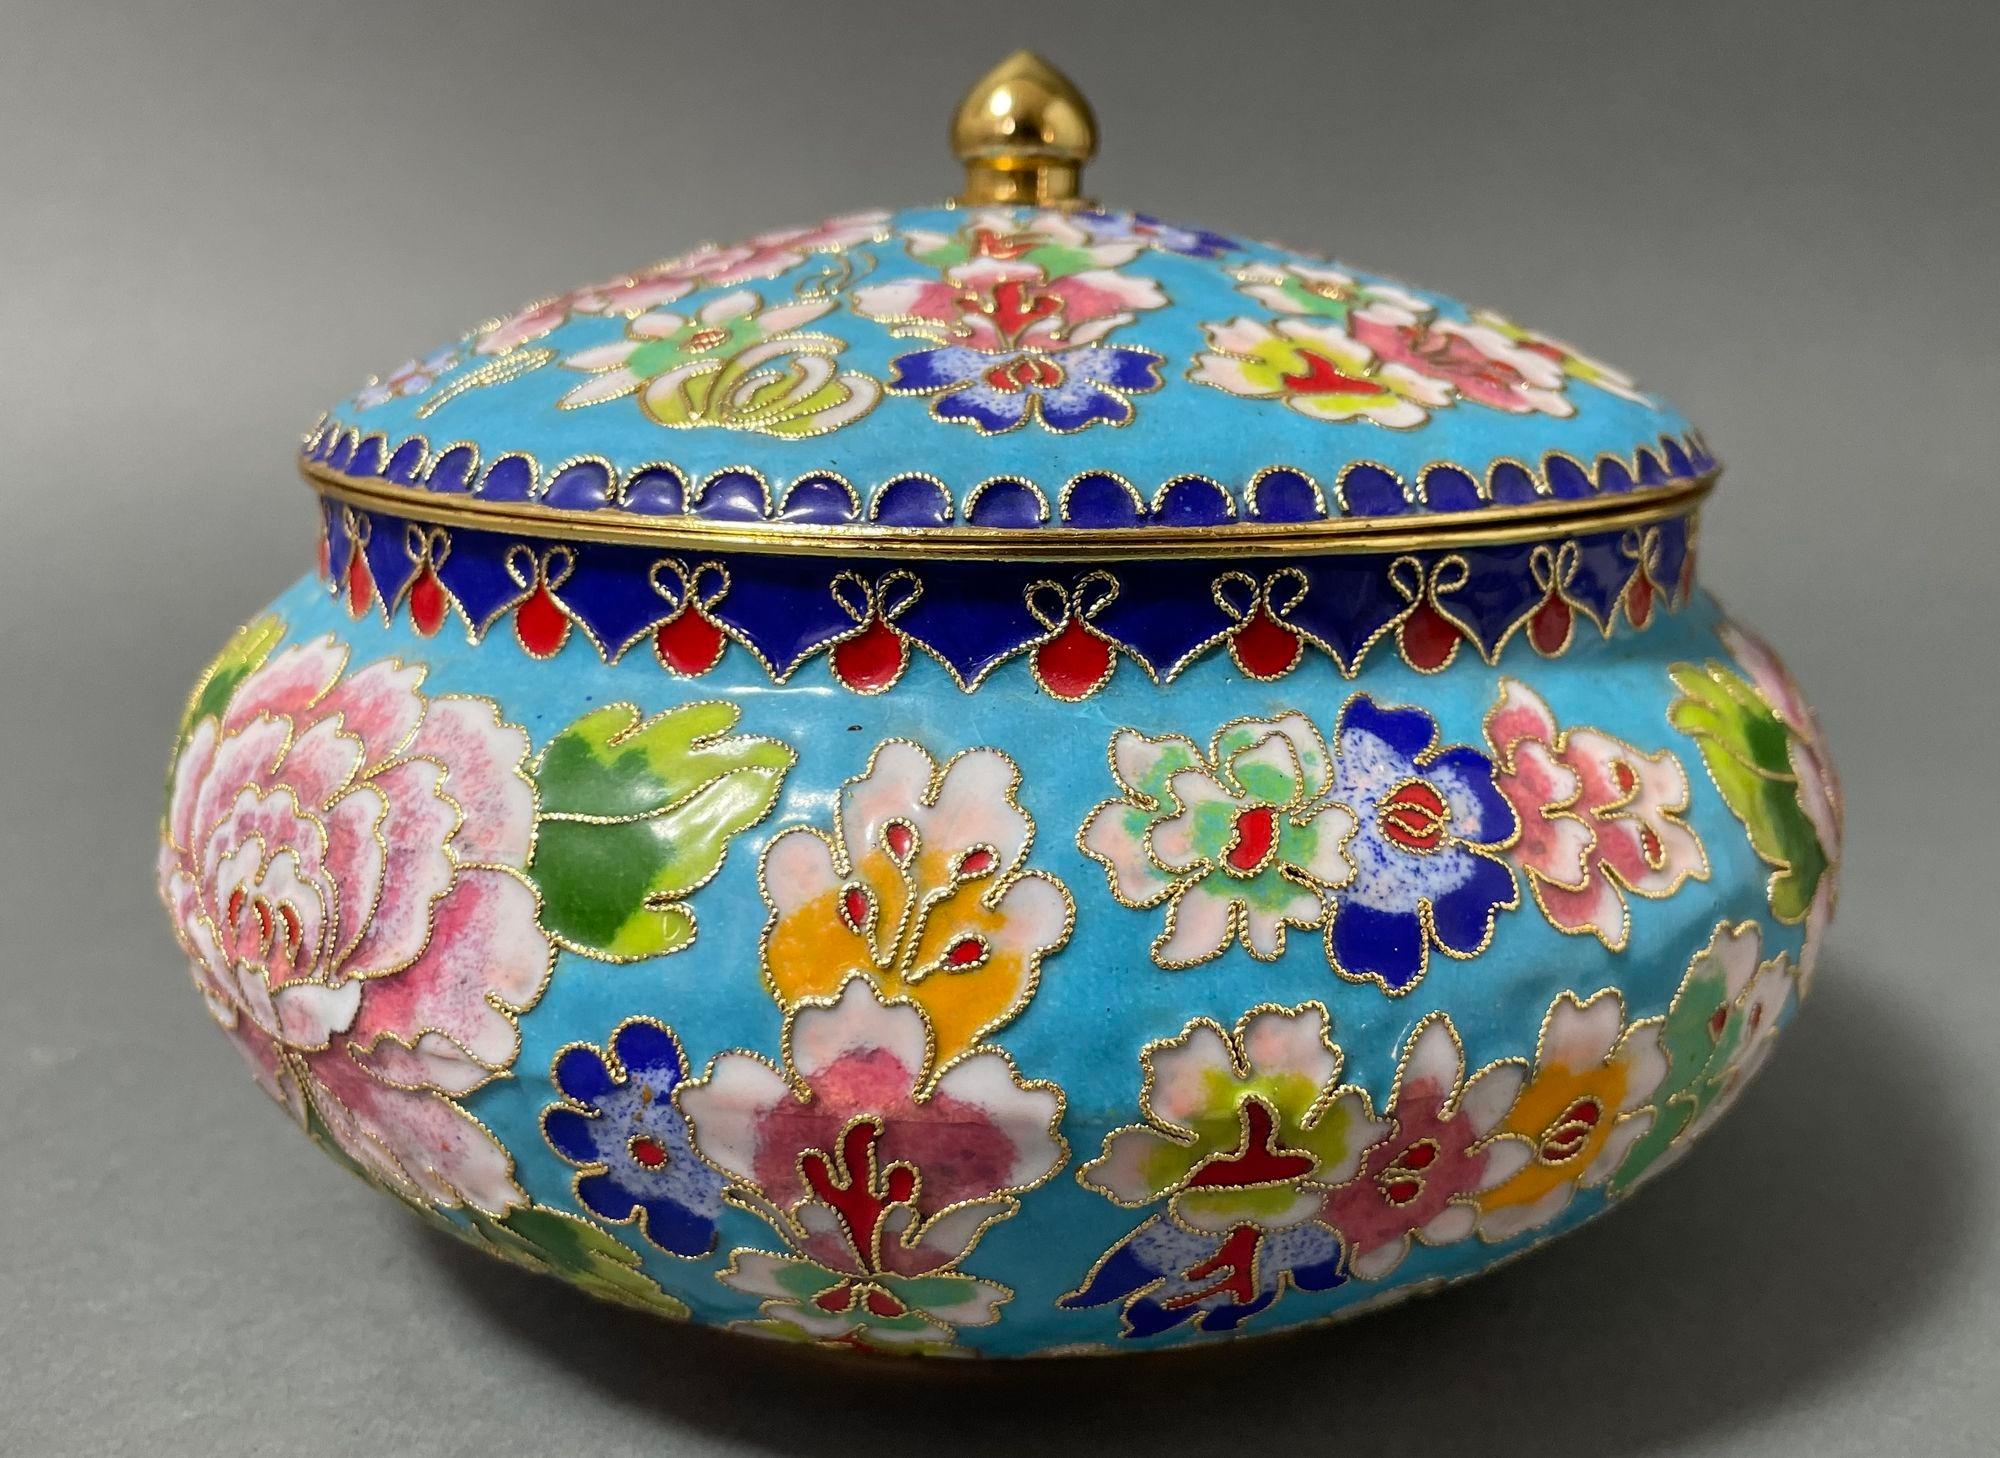 Asian Chinese Cloisonne Box with Lid Turquoise Cobalt Blue Red Pink Colors.
Handcrafted gilt and cloisonne enamel bonbonniere using traditional cloisonné-making techniques using materials including copper, glaze and brass gold.
The cloisonne is